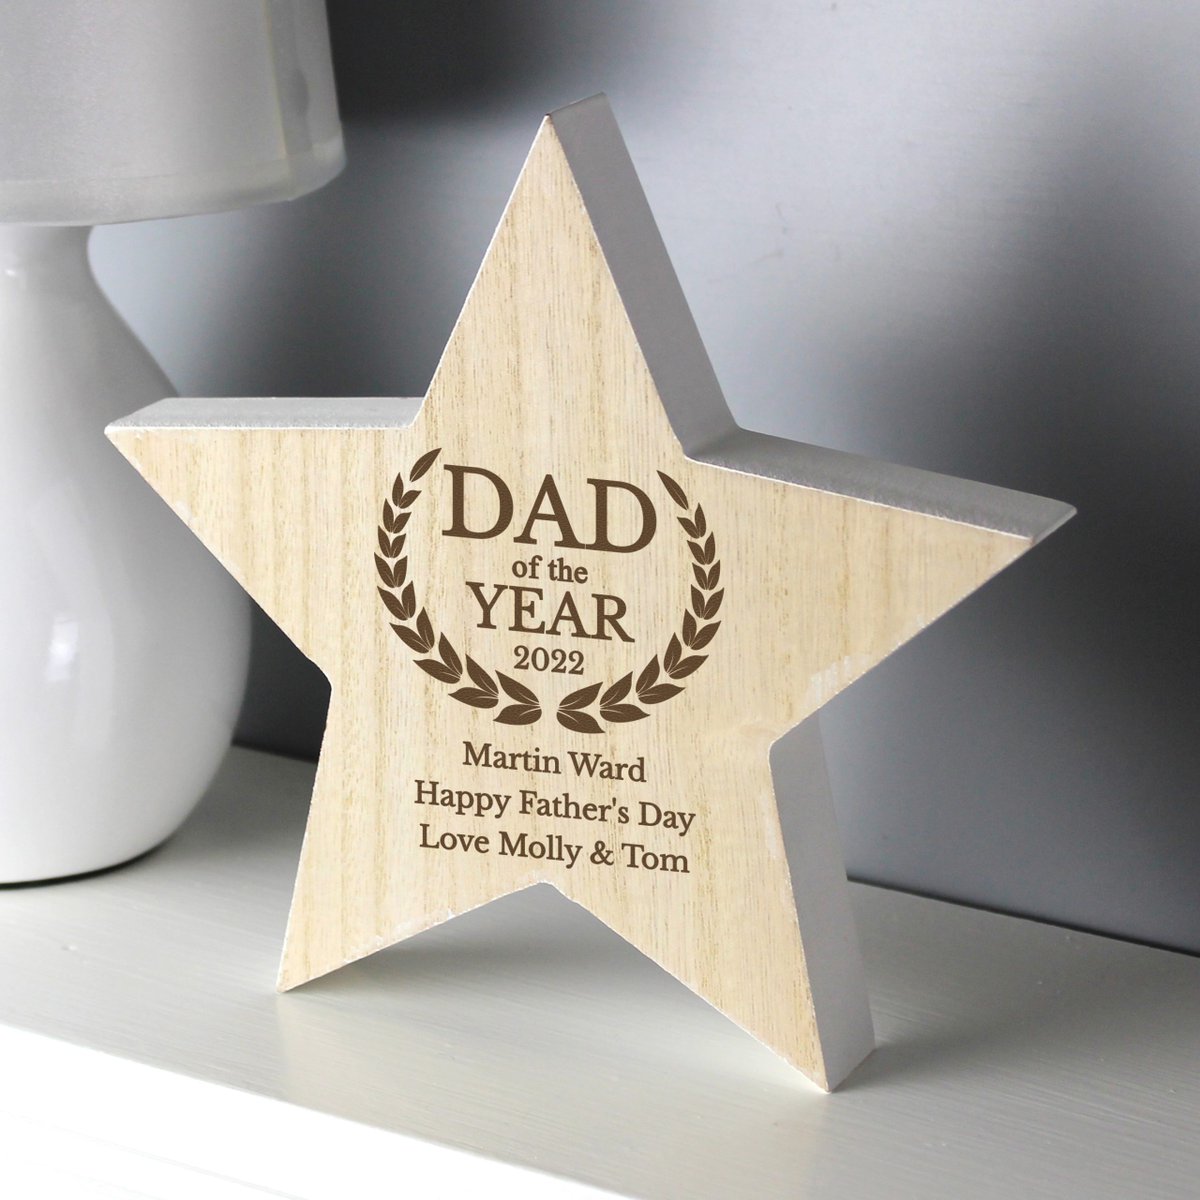 Personalised Dad of the Year Rustic Wooden Star Decoration xclusivegifts.co.uk/product/person… 
#woodendecoration #FathersDay #fathersdaygift #giftideas